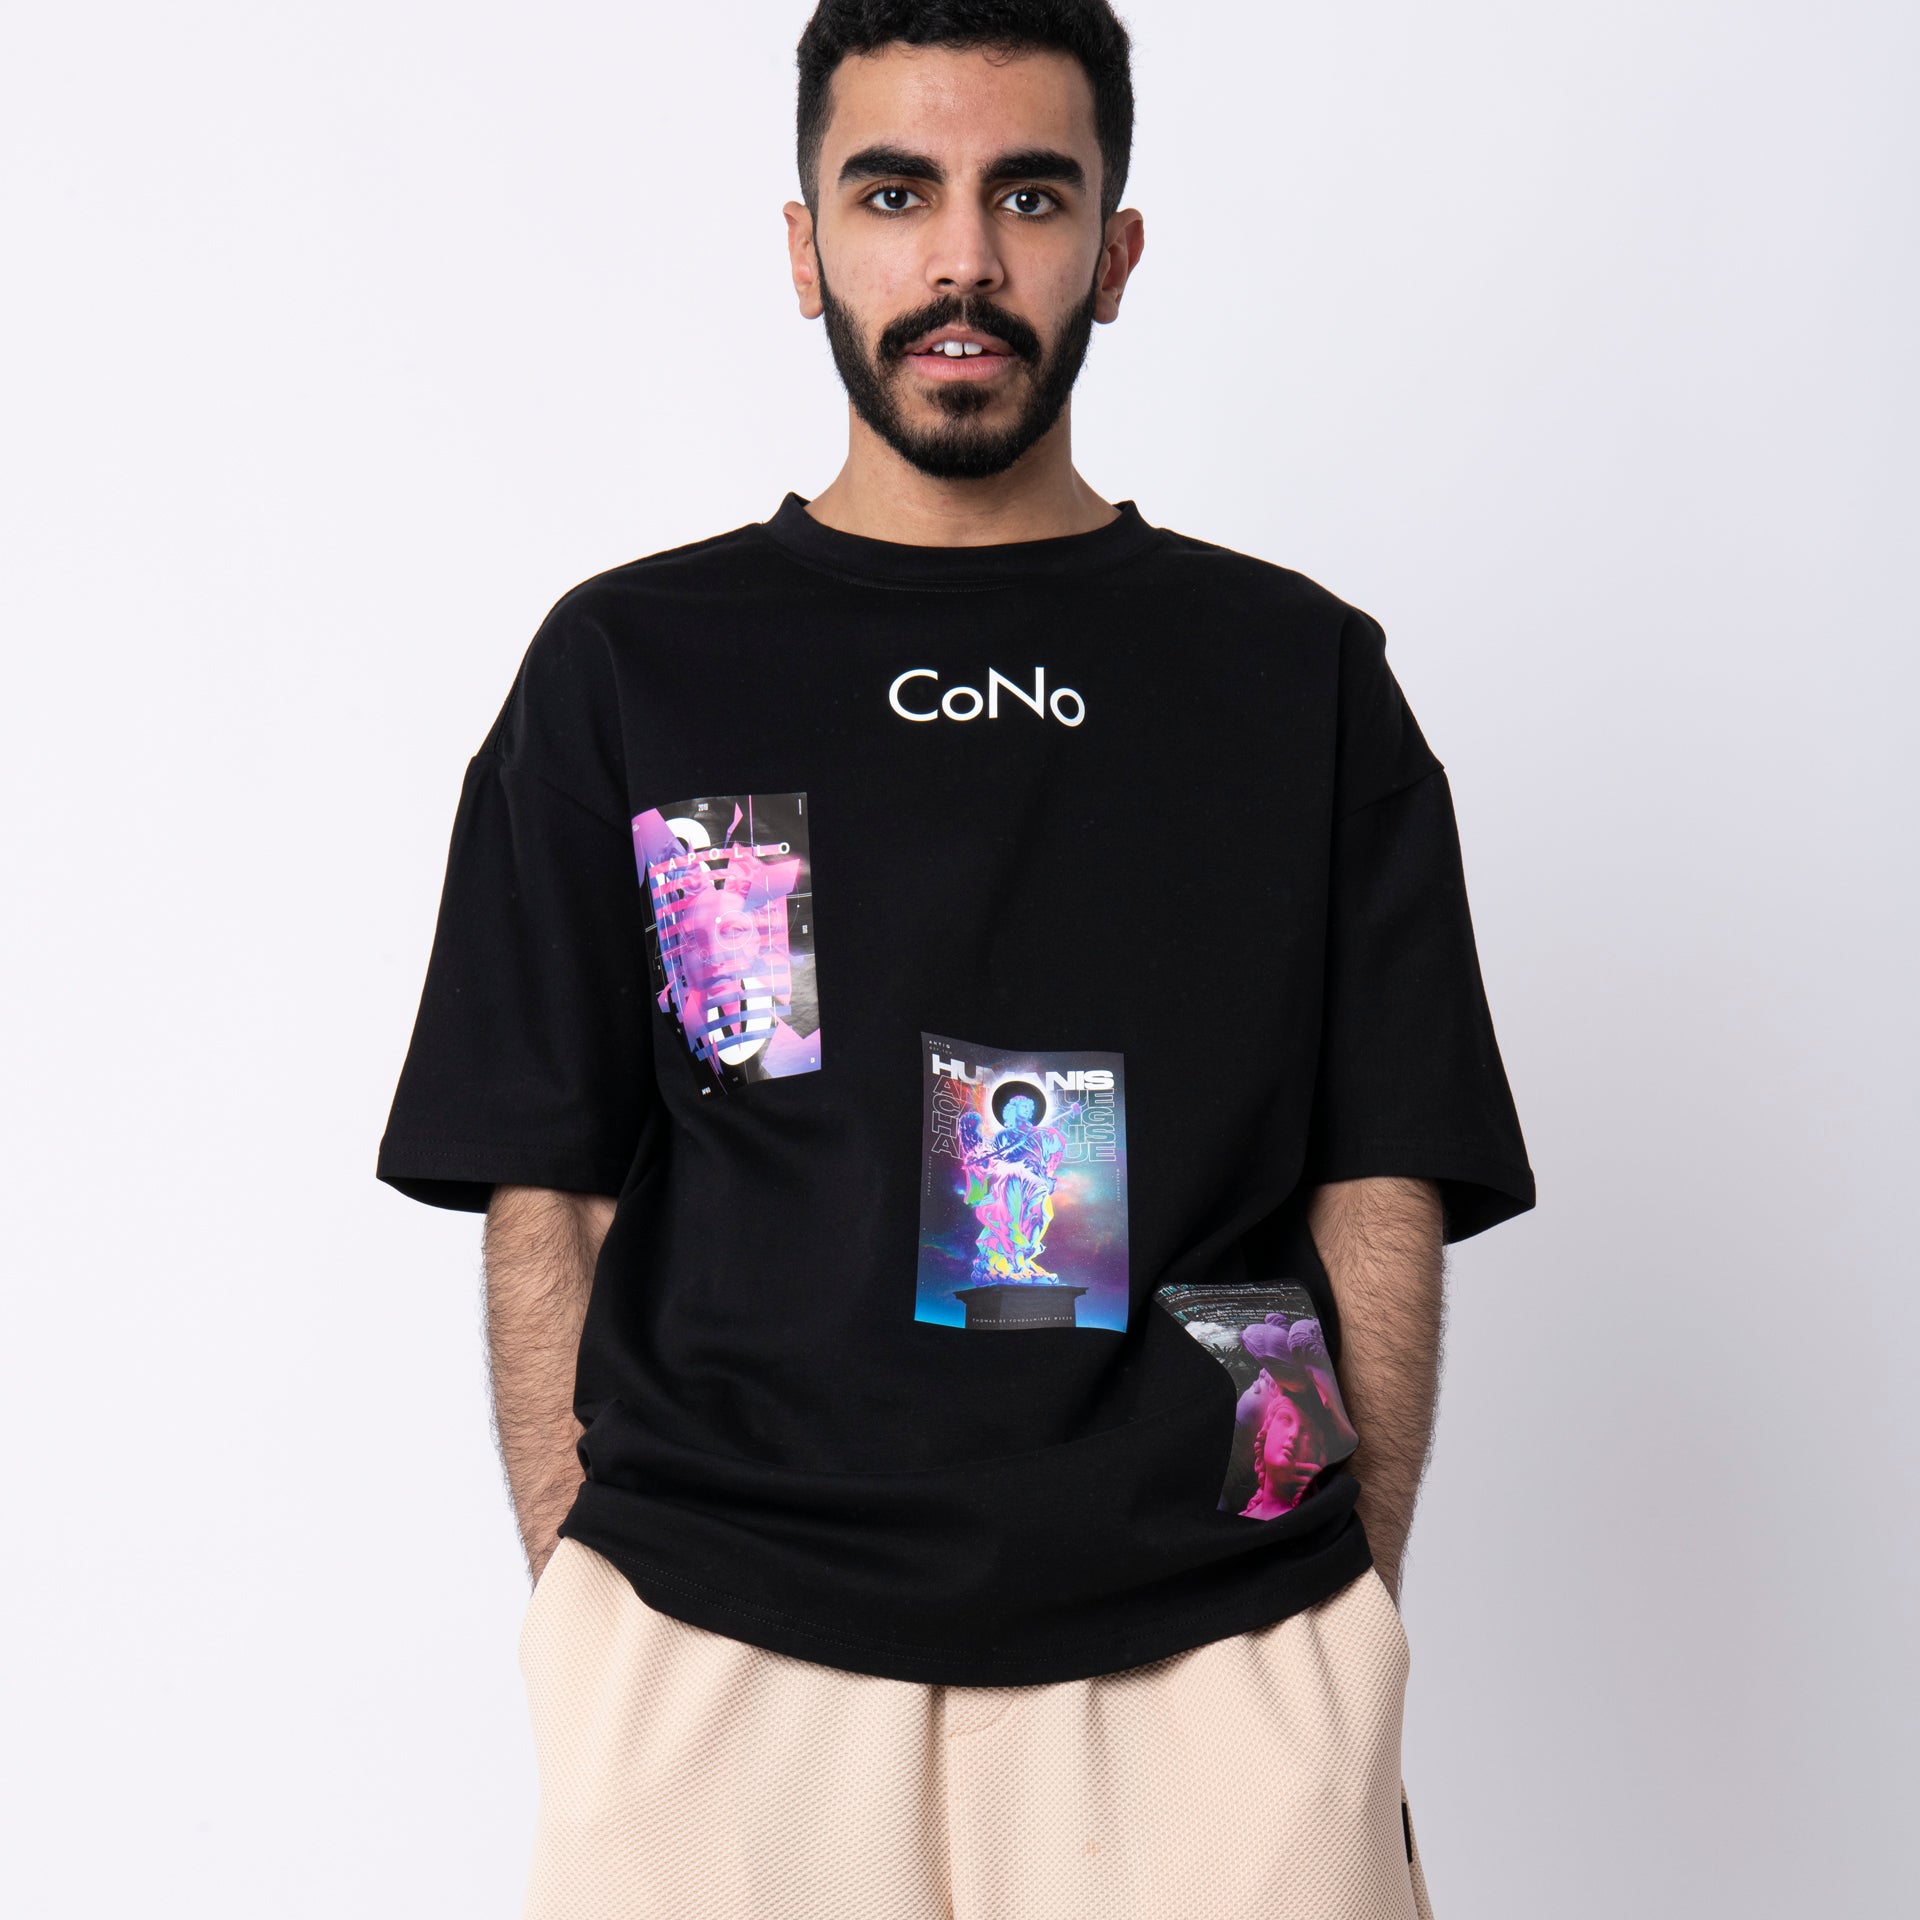 Black T-shirt With 3 photos Prints From Cono